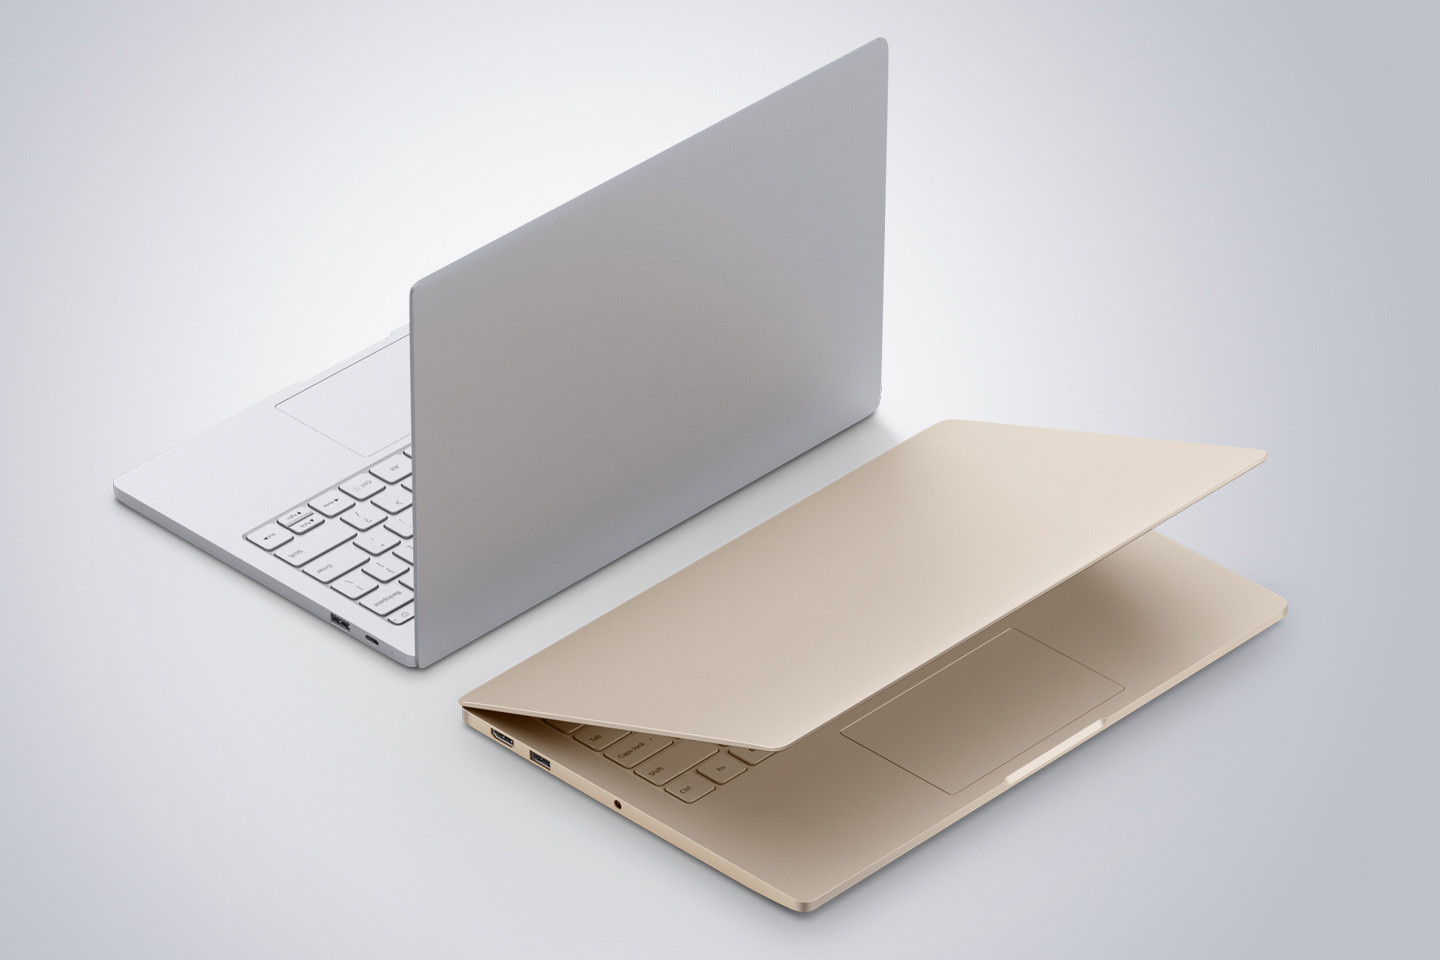 Xiaomi unveils Macbook Air competitor, the 13.3 and 12.5inch Mi 